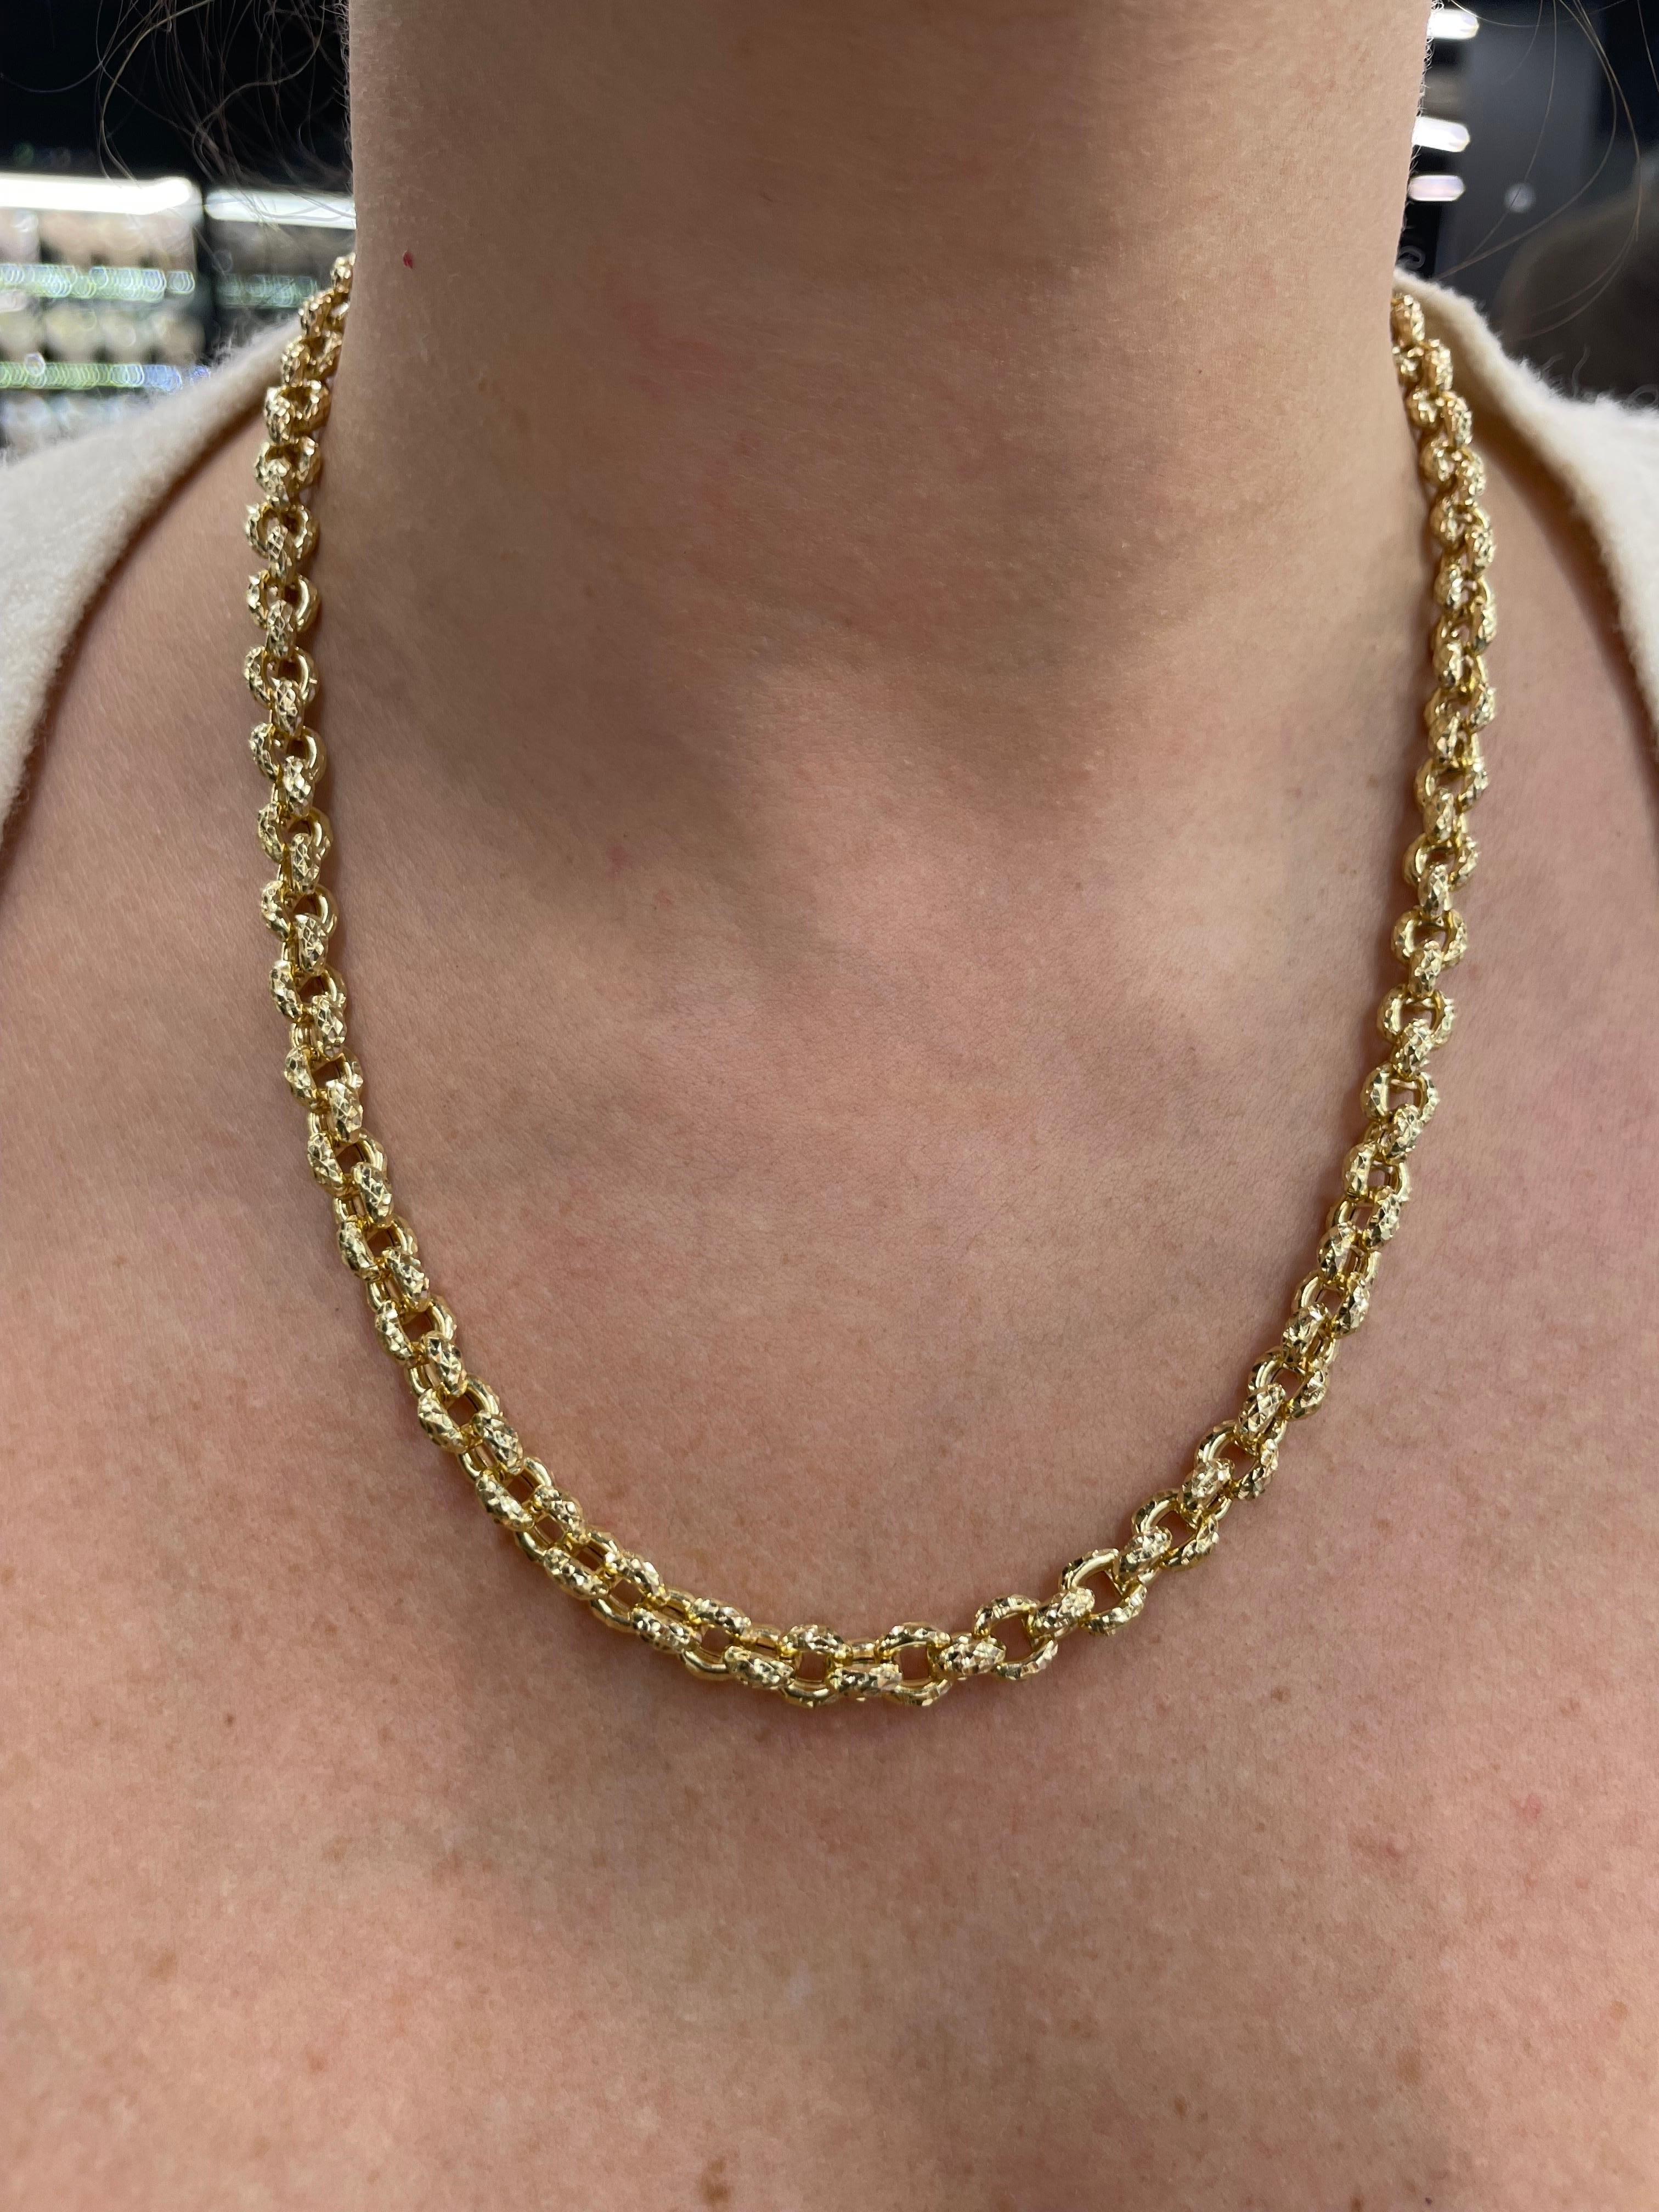 14 Karat Yellow Gold Hammered Link Necklace 31.24 Grams For Sale 2